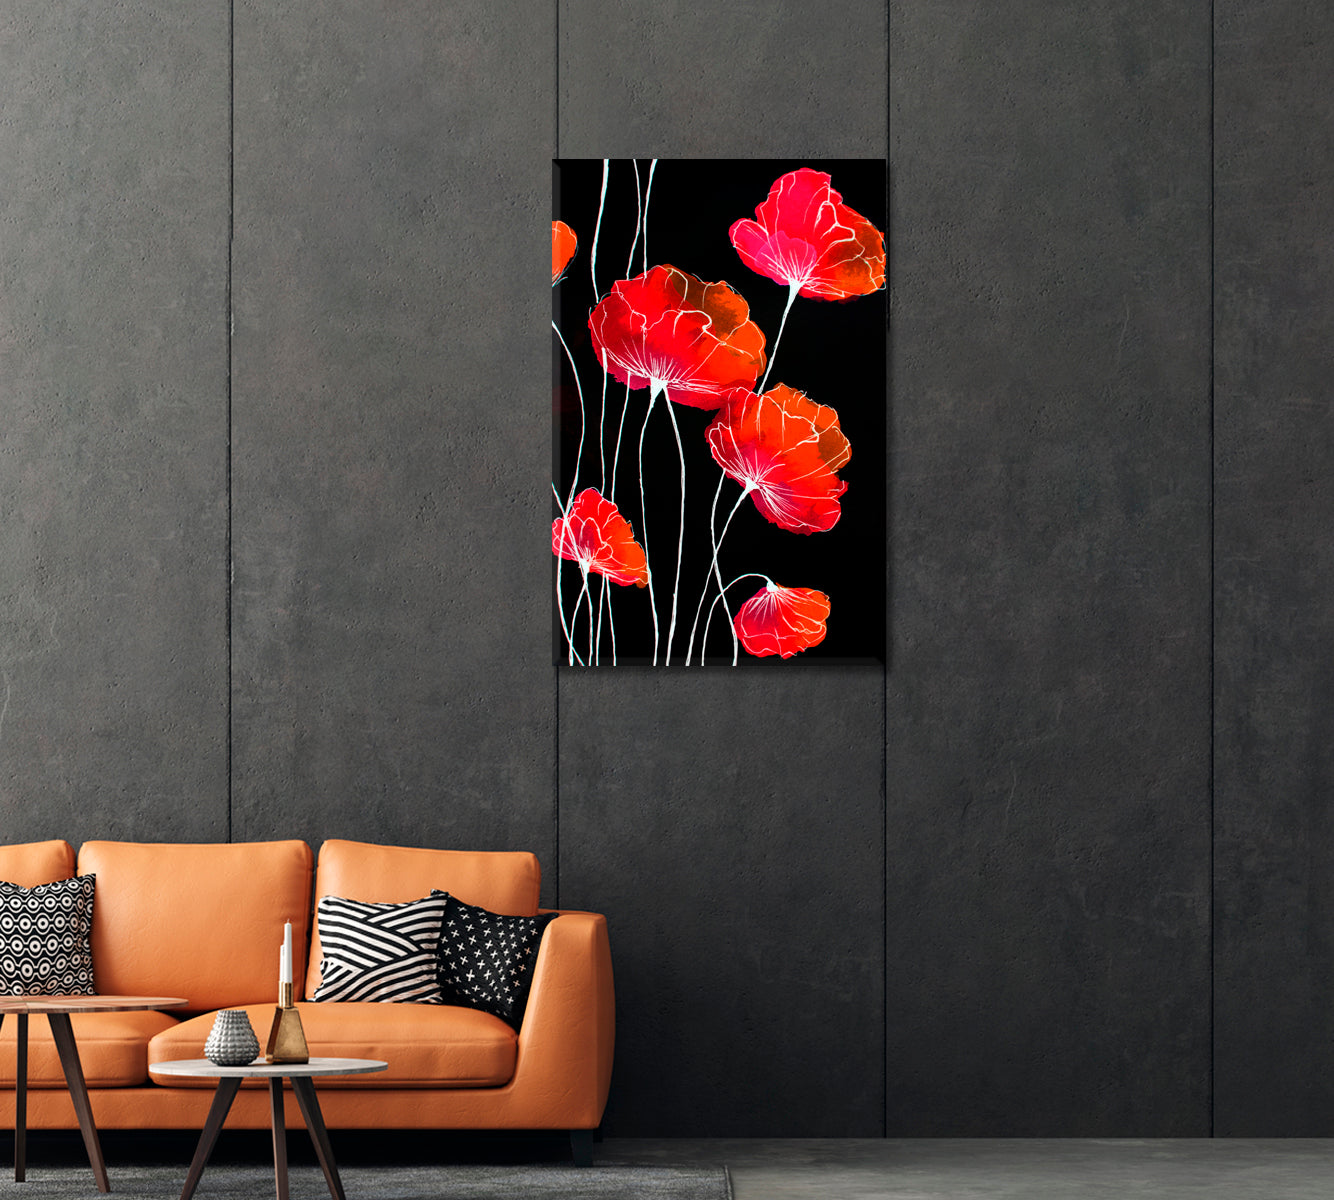 Abstract Flowers Floral Still Life Canvas Print-Canvas Print-CetArt-1 panel-16x24 inches-CetArt